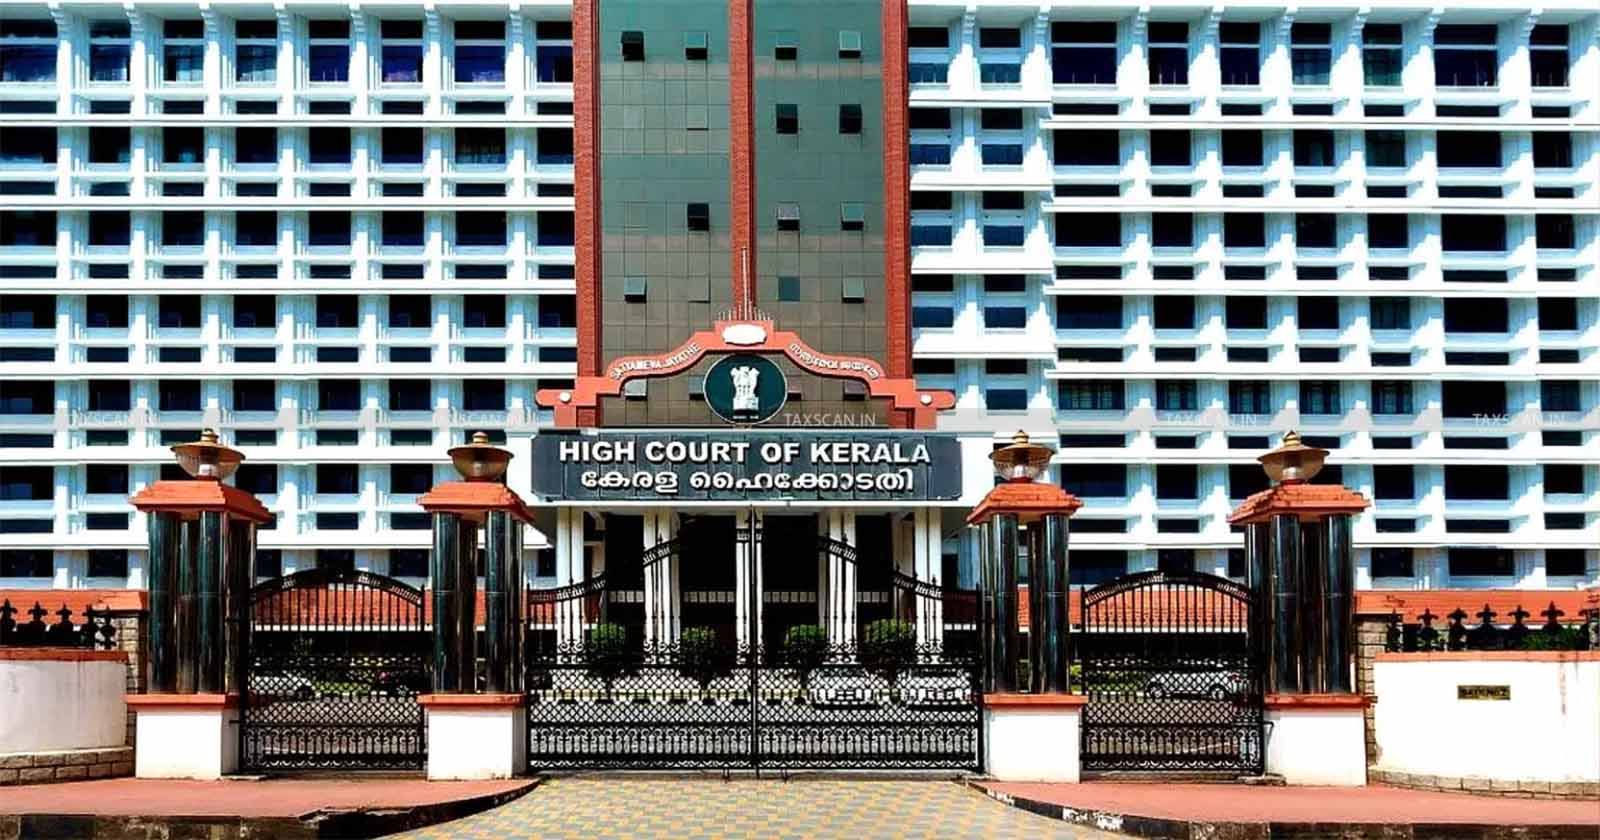 Person can Always Participate - Re Auction - Cancellation of Auction-Kerala HC-TAXSCANN